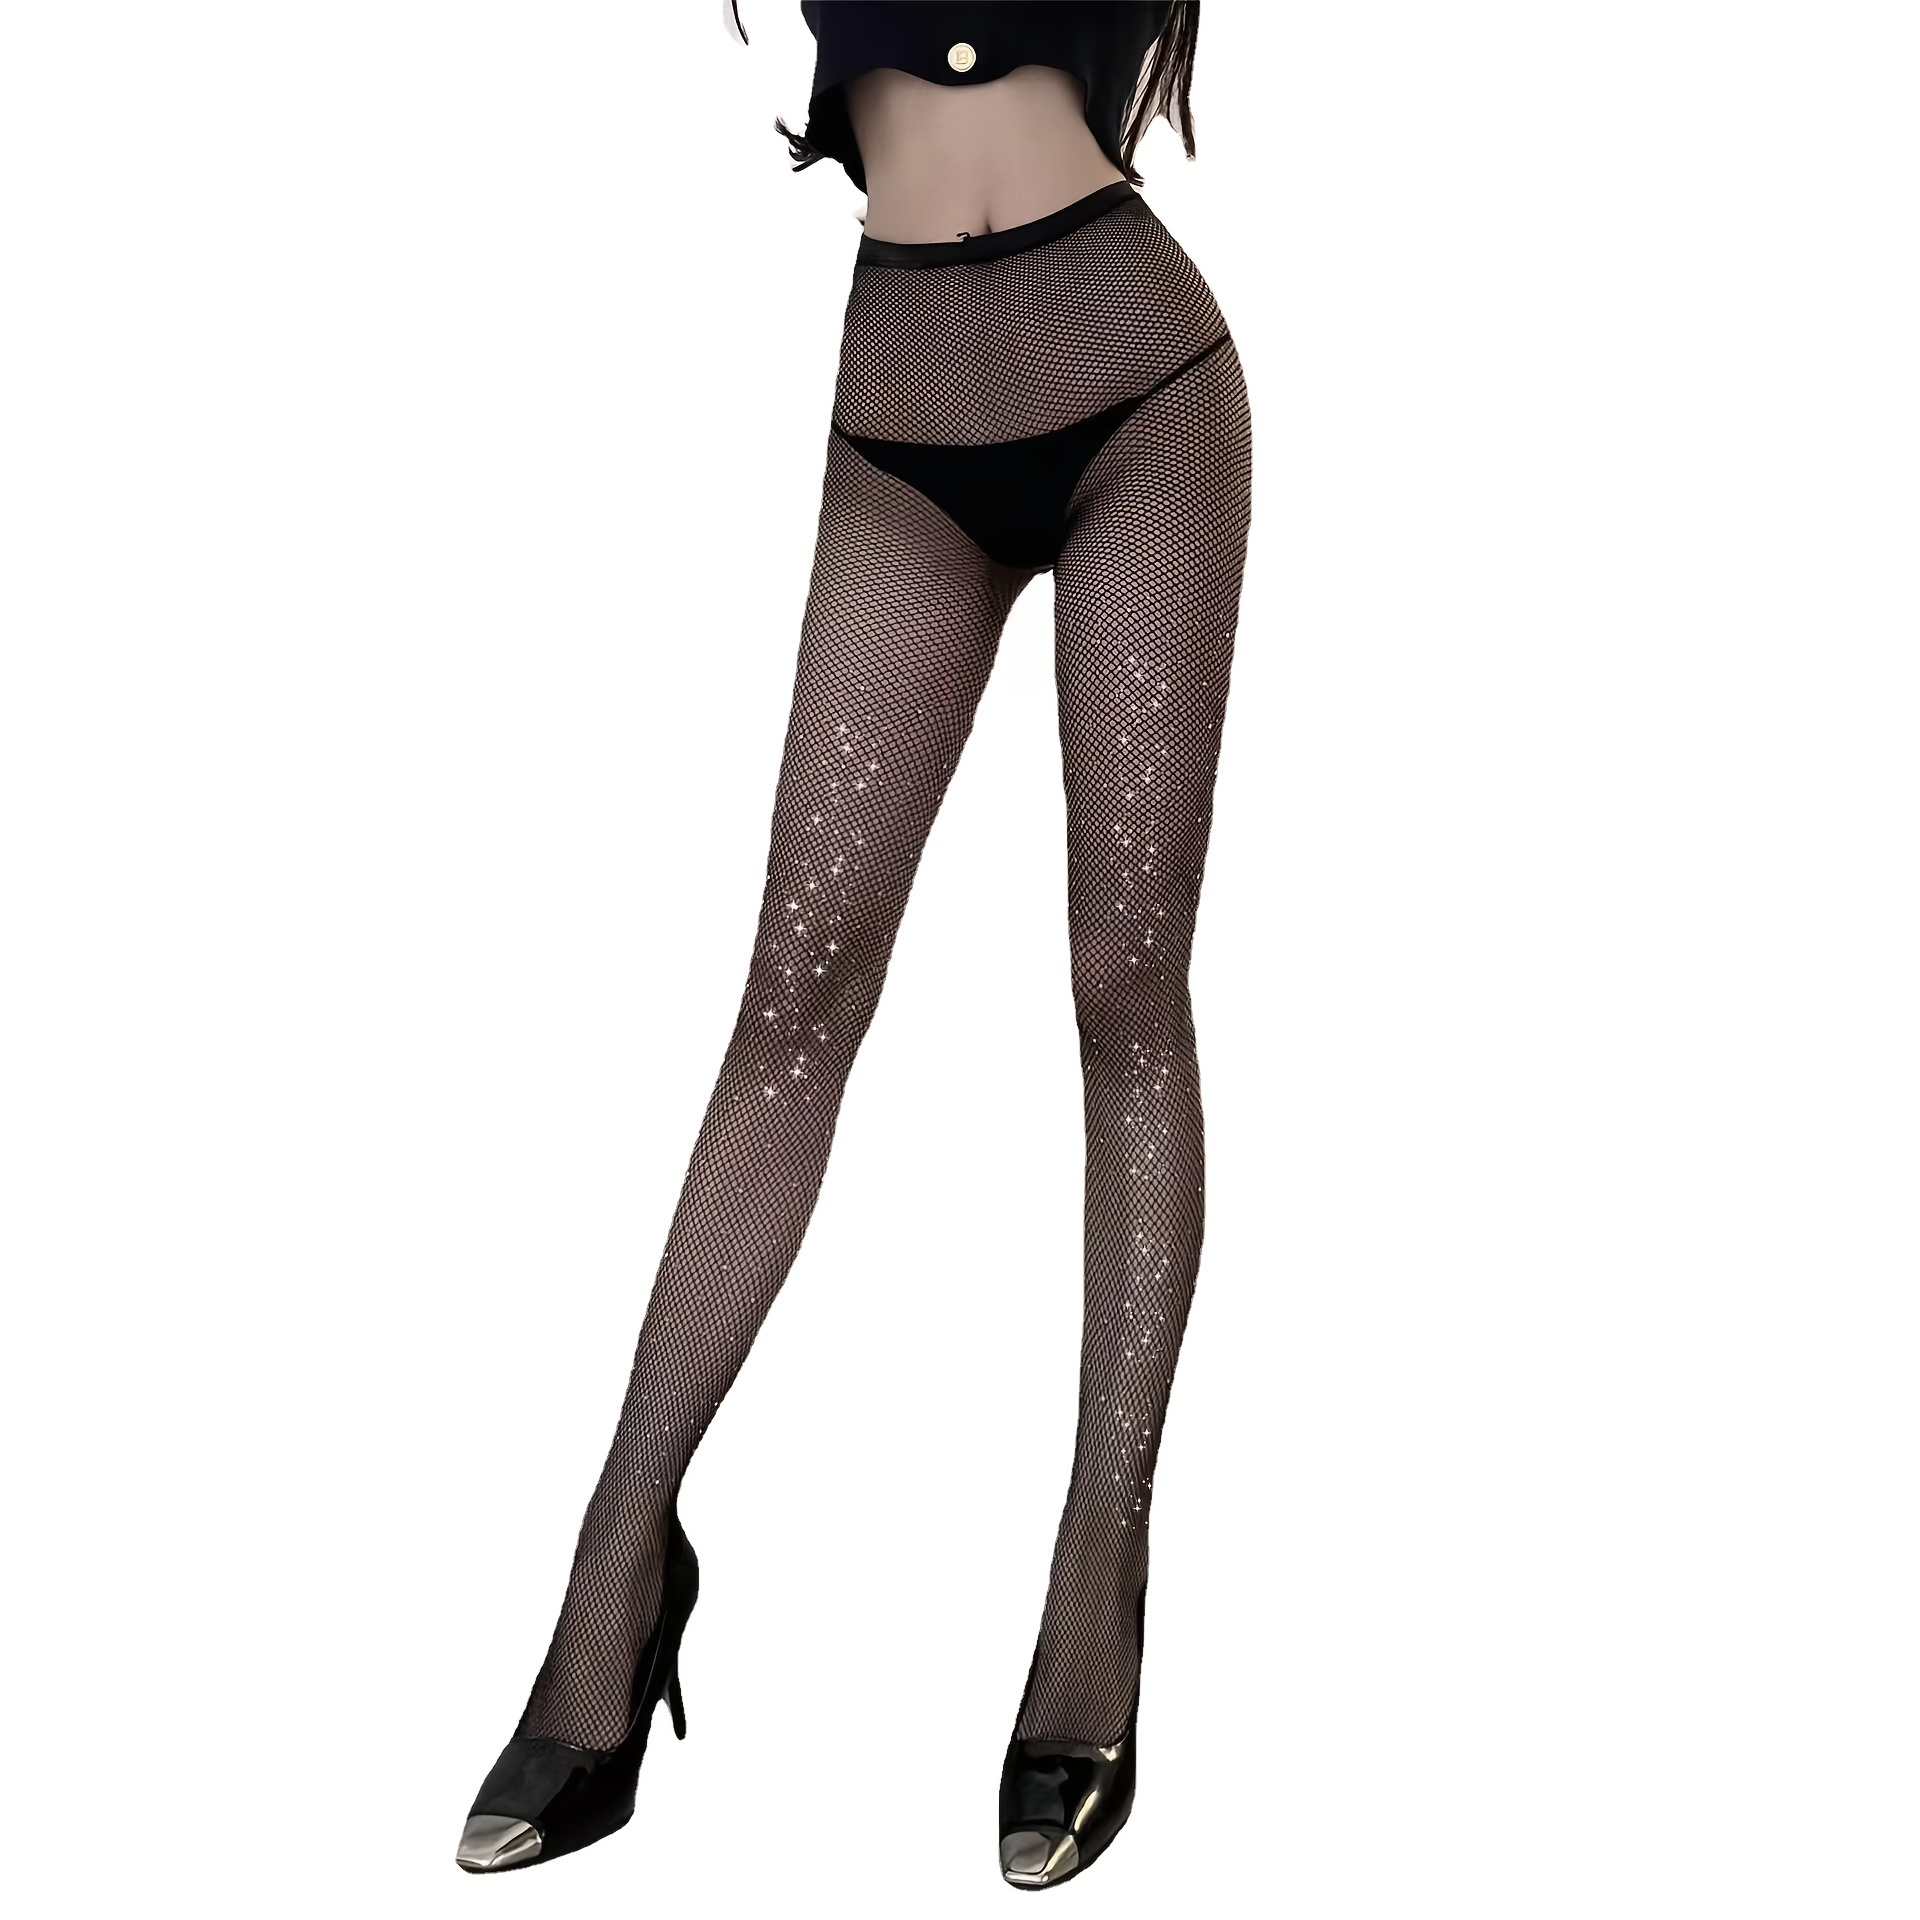 Shimmer Black Tights - Party Time, Inc.